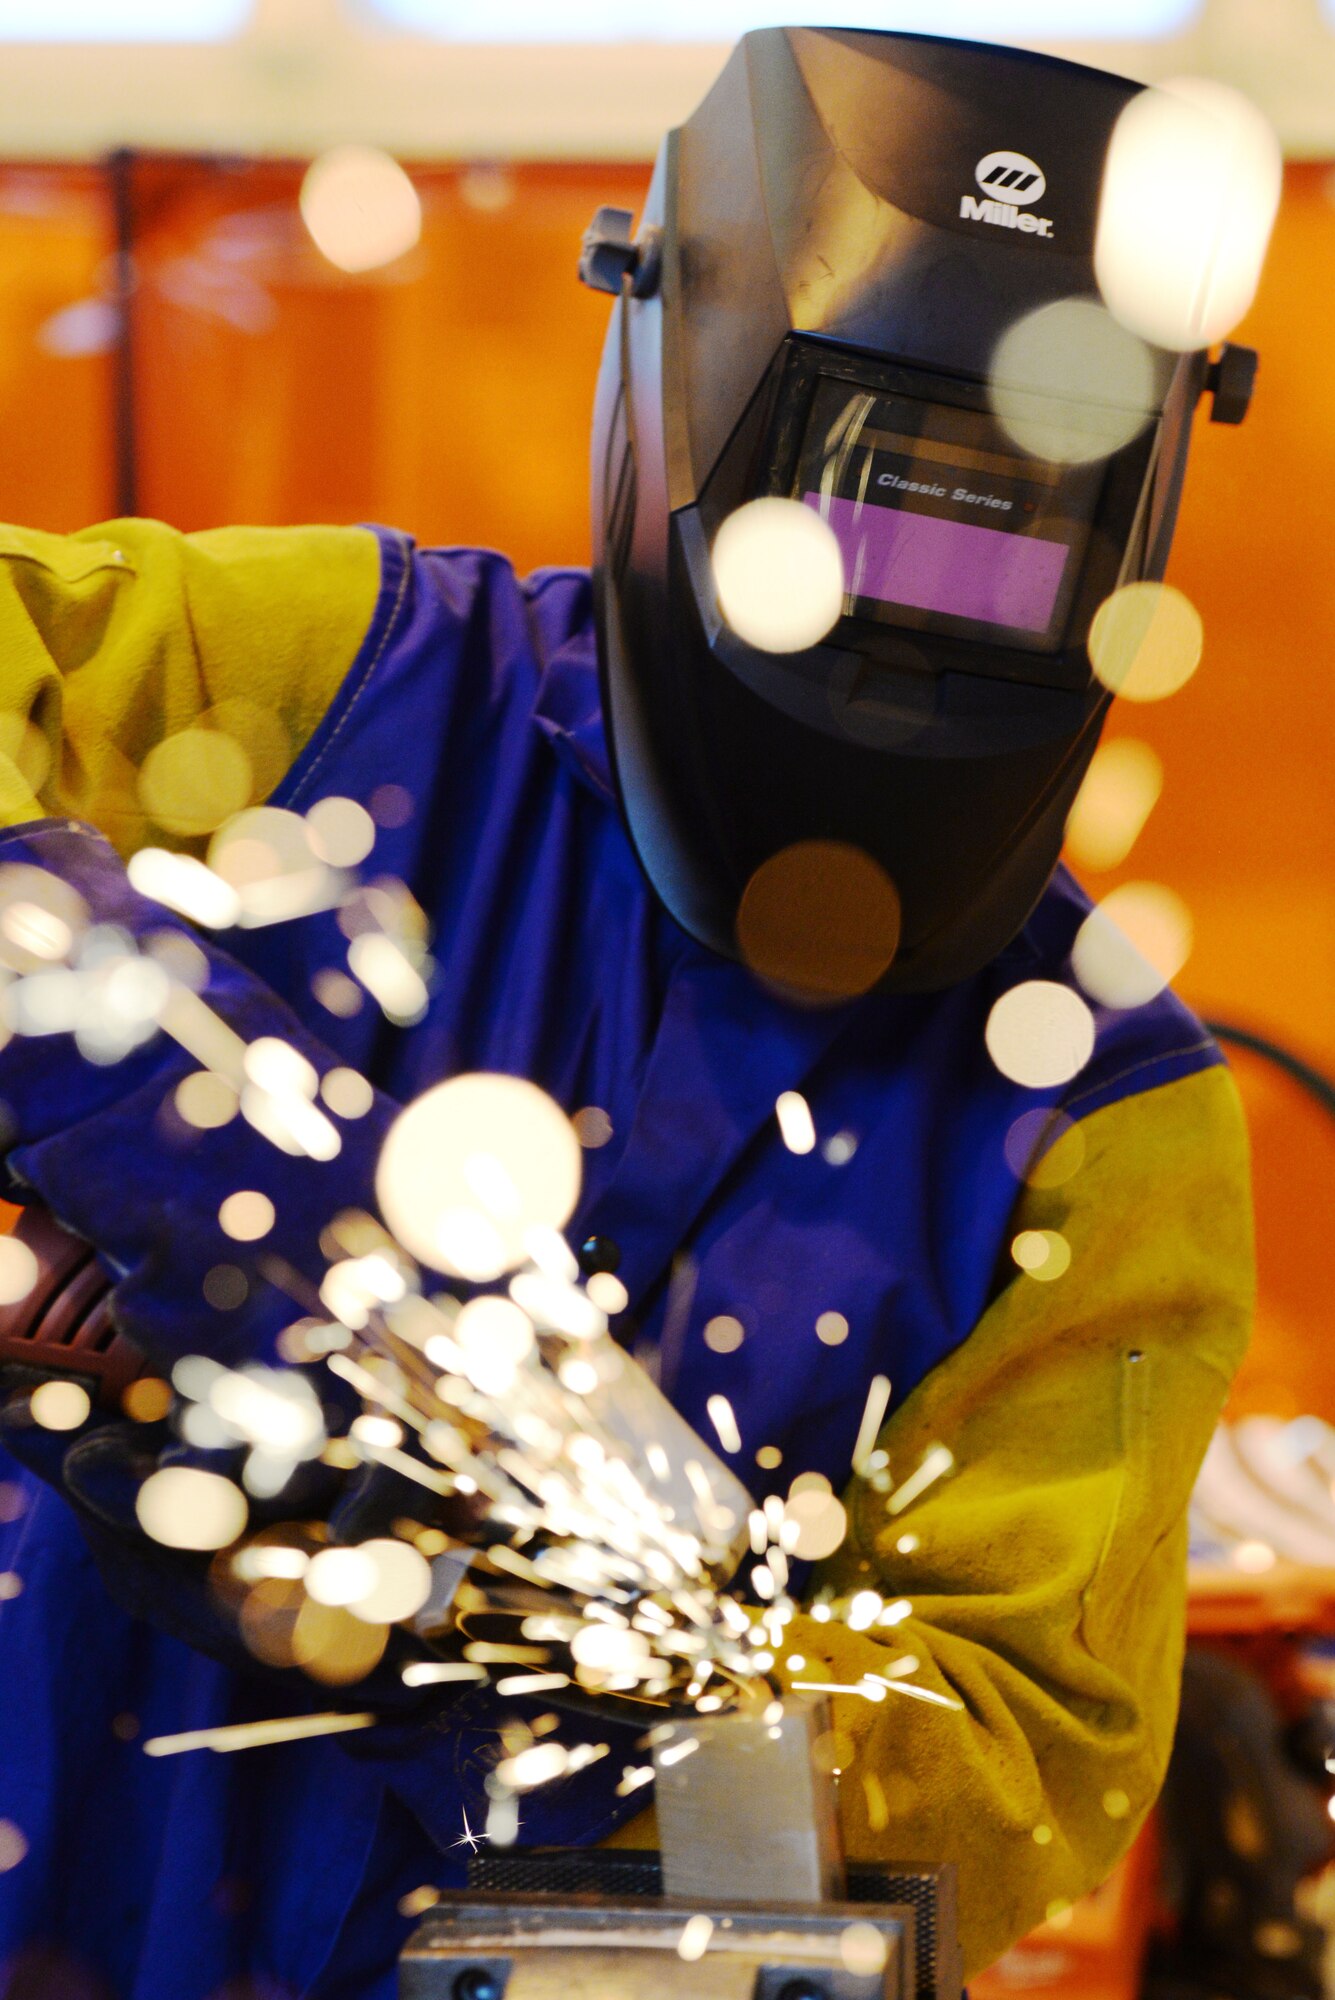 A welder with the Rapid Development Integration Facility grinds down some metal while working on a project inside the 20,000-square-foot manufacturing and modification facility at Wright-Patterson Air Force Base, Ohio, Dec. 2, 2015. Since its start, the RDIF has successfully returned more than $150 million to customers who can then use that money on additional projects. Additionally, the facility has enabled its customers to realize more than 70 percent cost savings and schedule time.